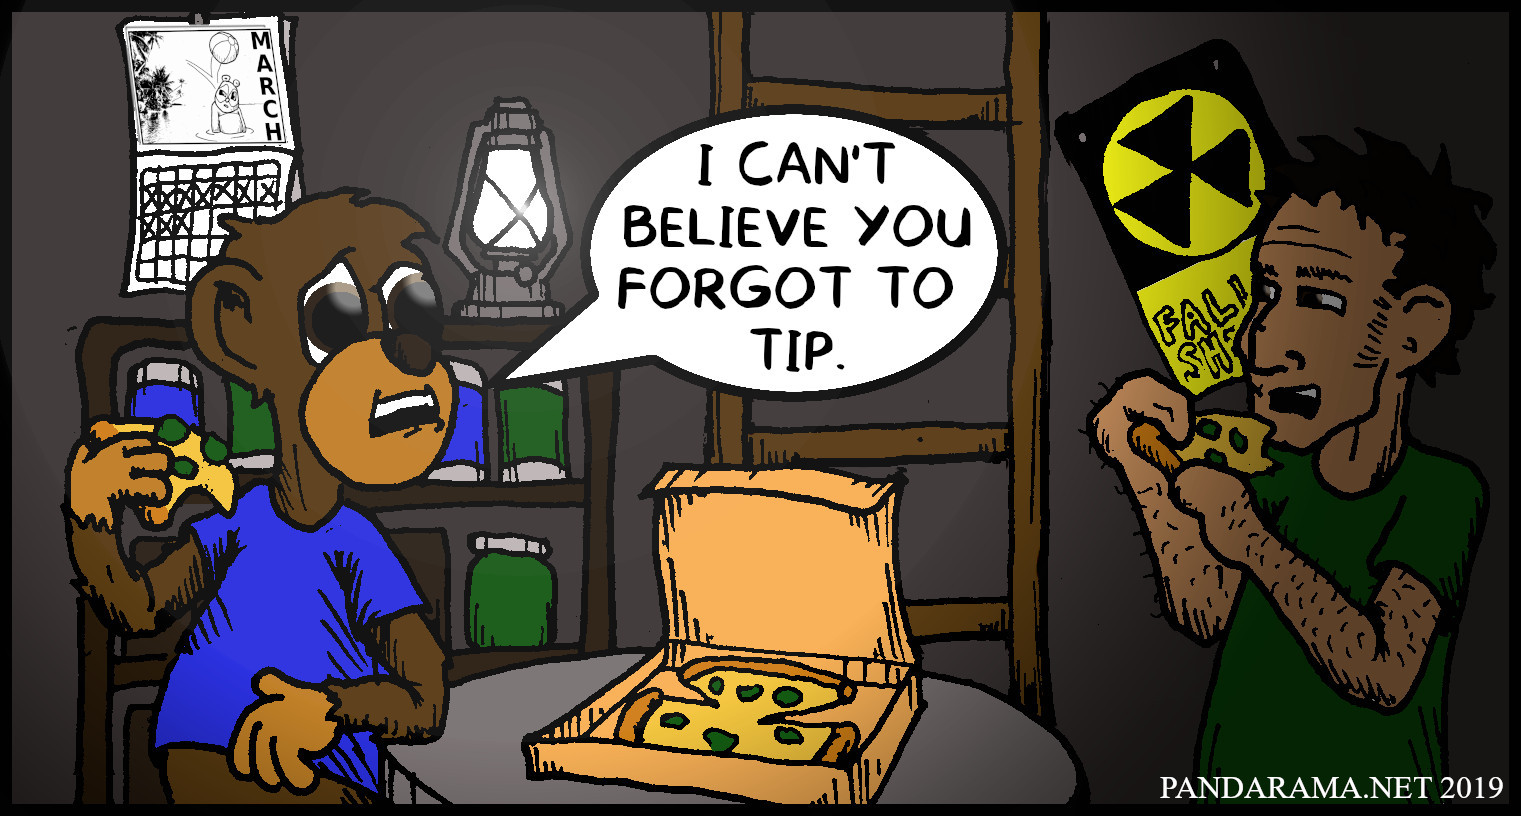 didn't tip driver who delivered pizza to fallout shelter.